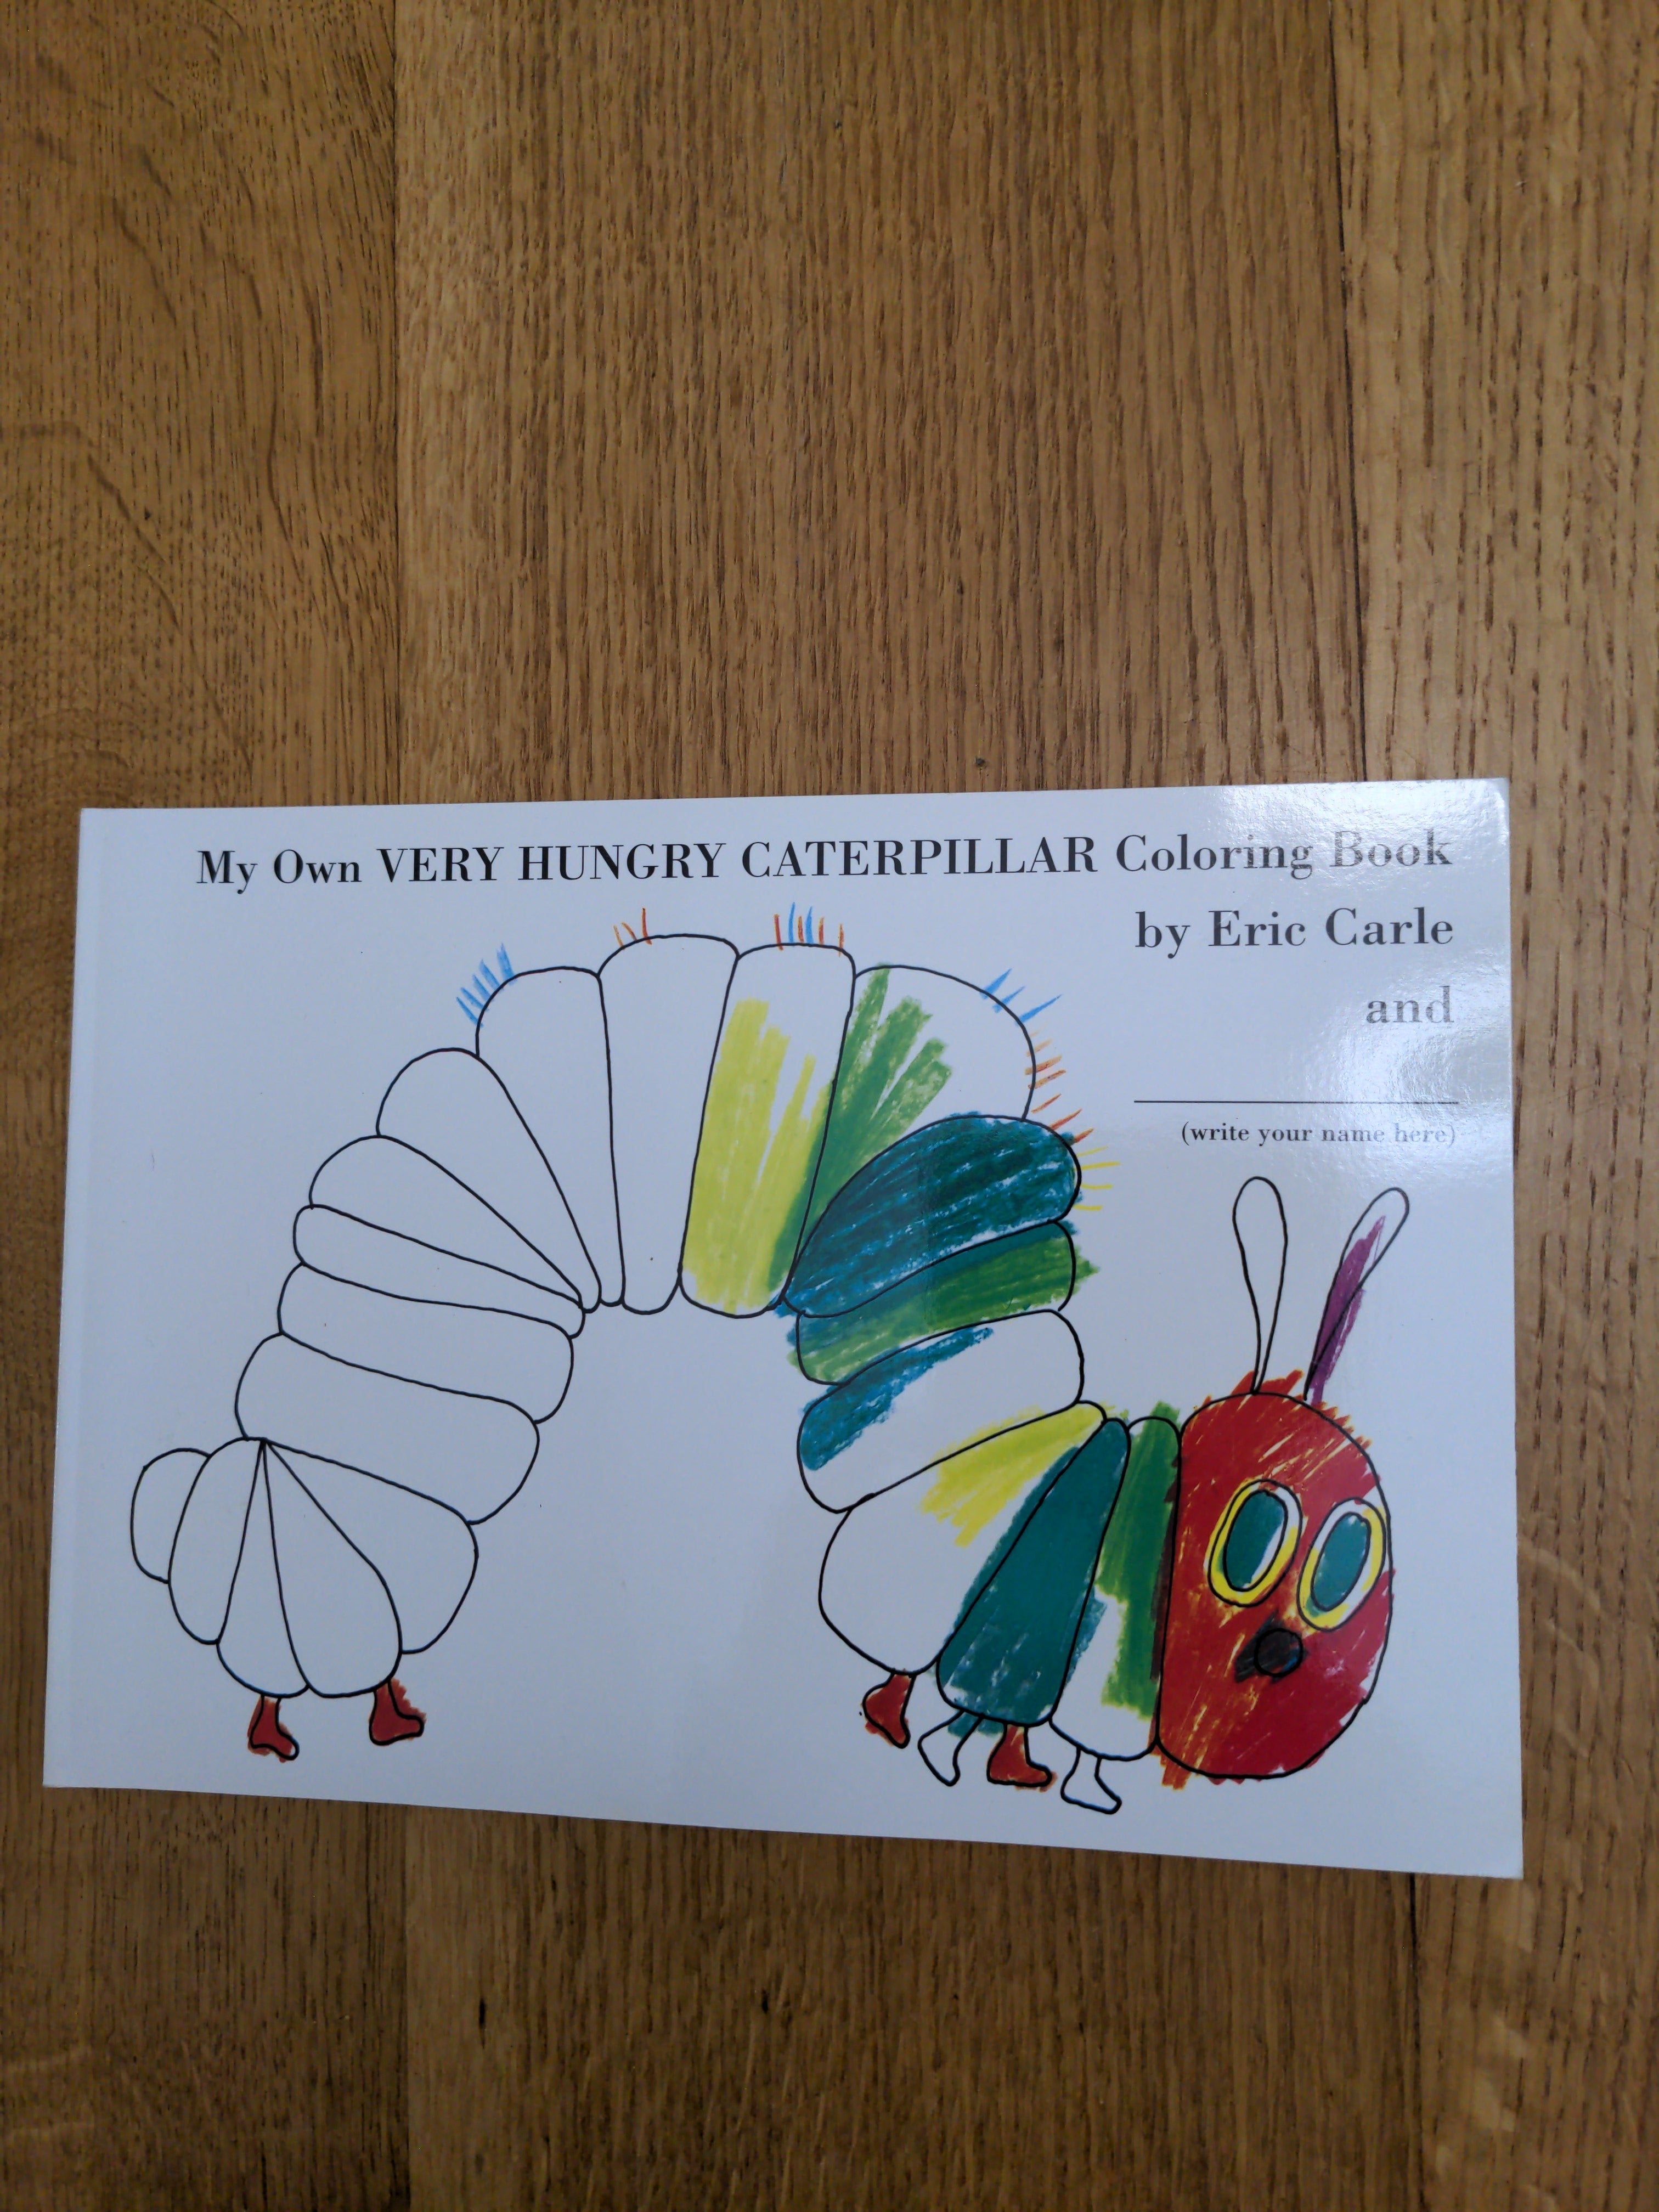 Eric　Caterpillar　by　Very　Book　Coloring　Hungry　Own　My　Pangobooks　Carle,　Paperback